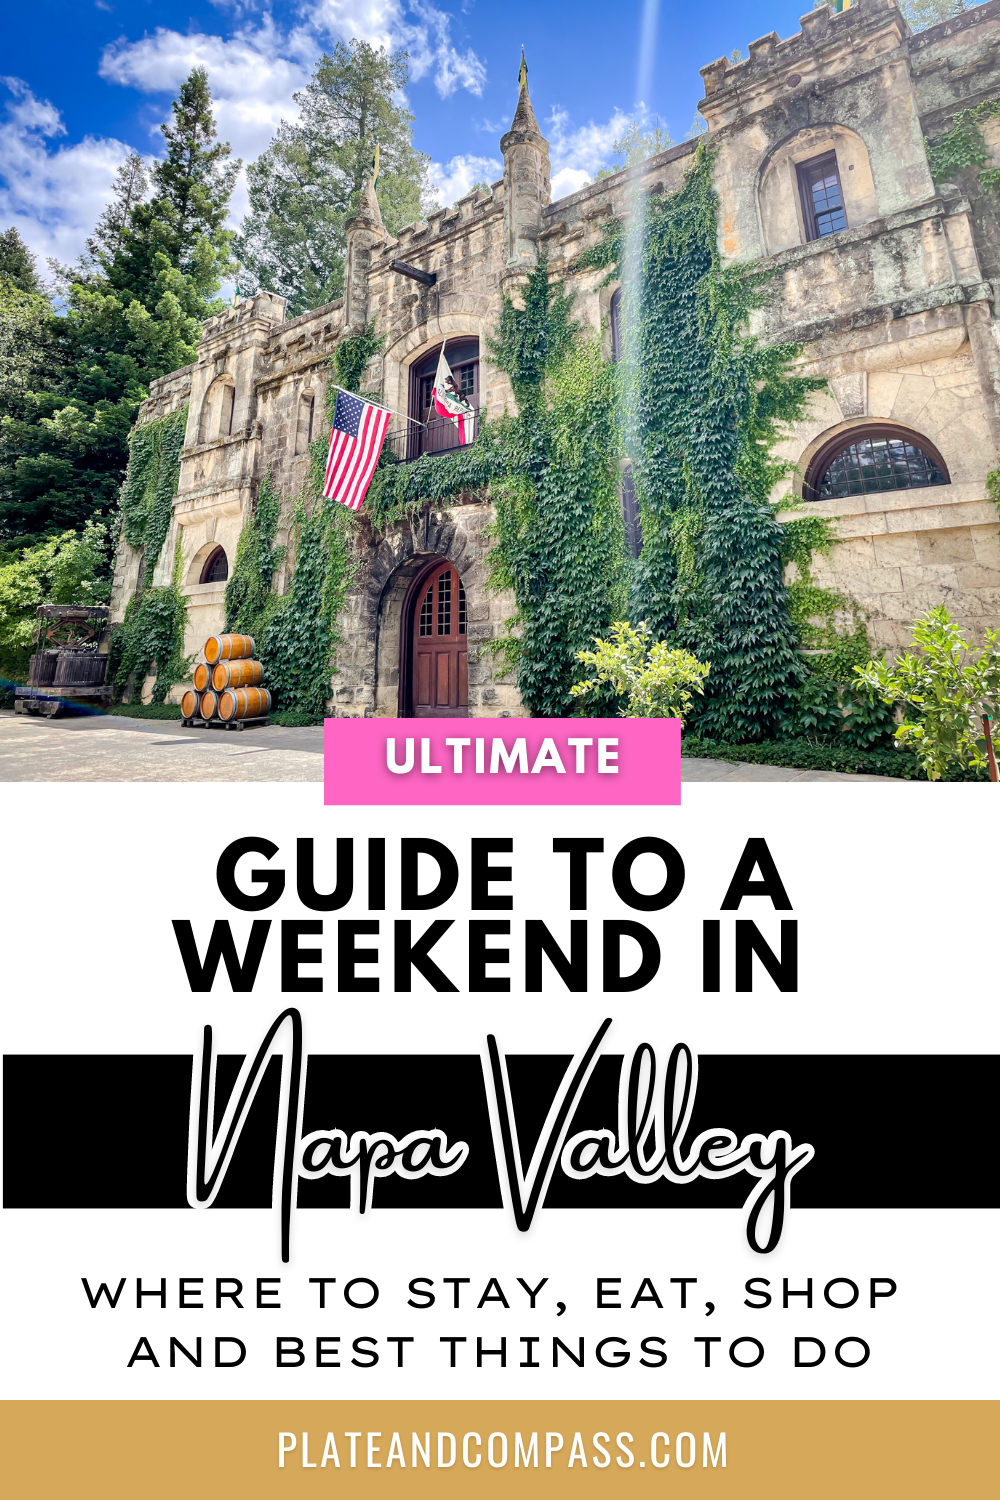 Guide to a Weekend in NAPA VALLEY